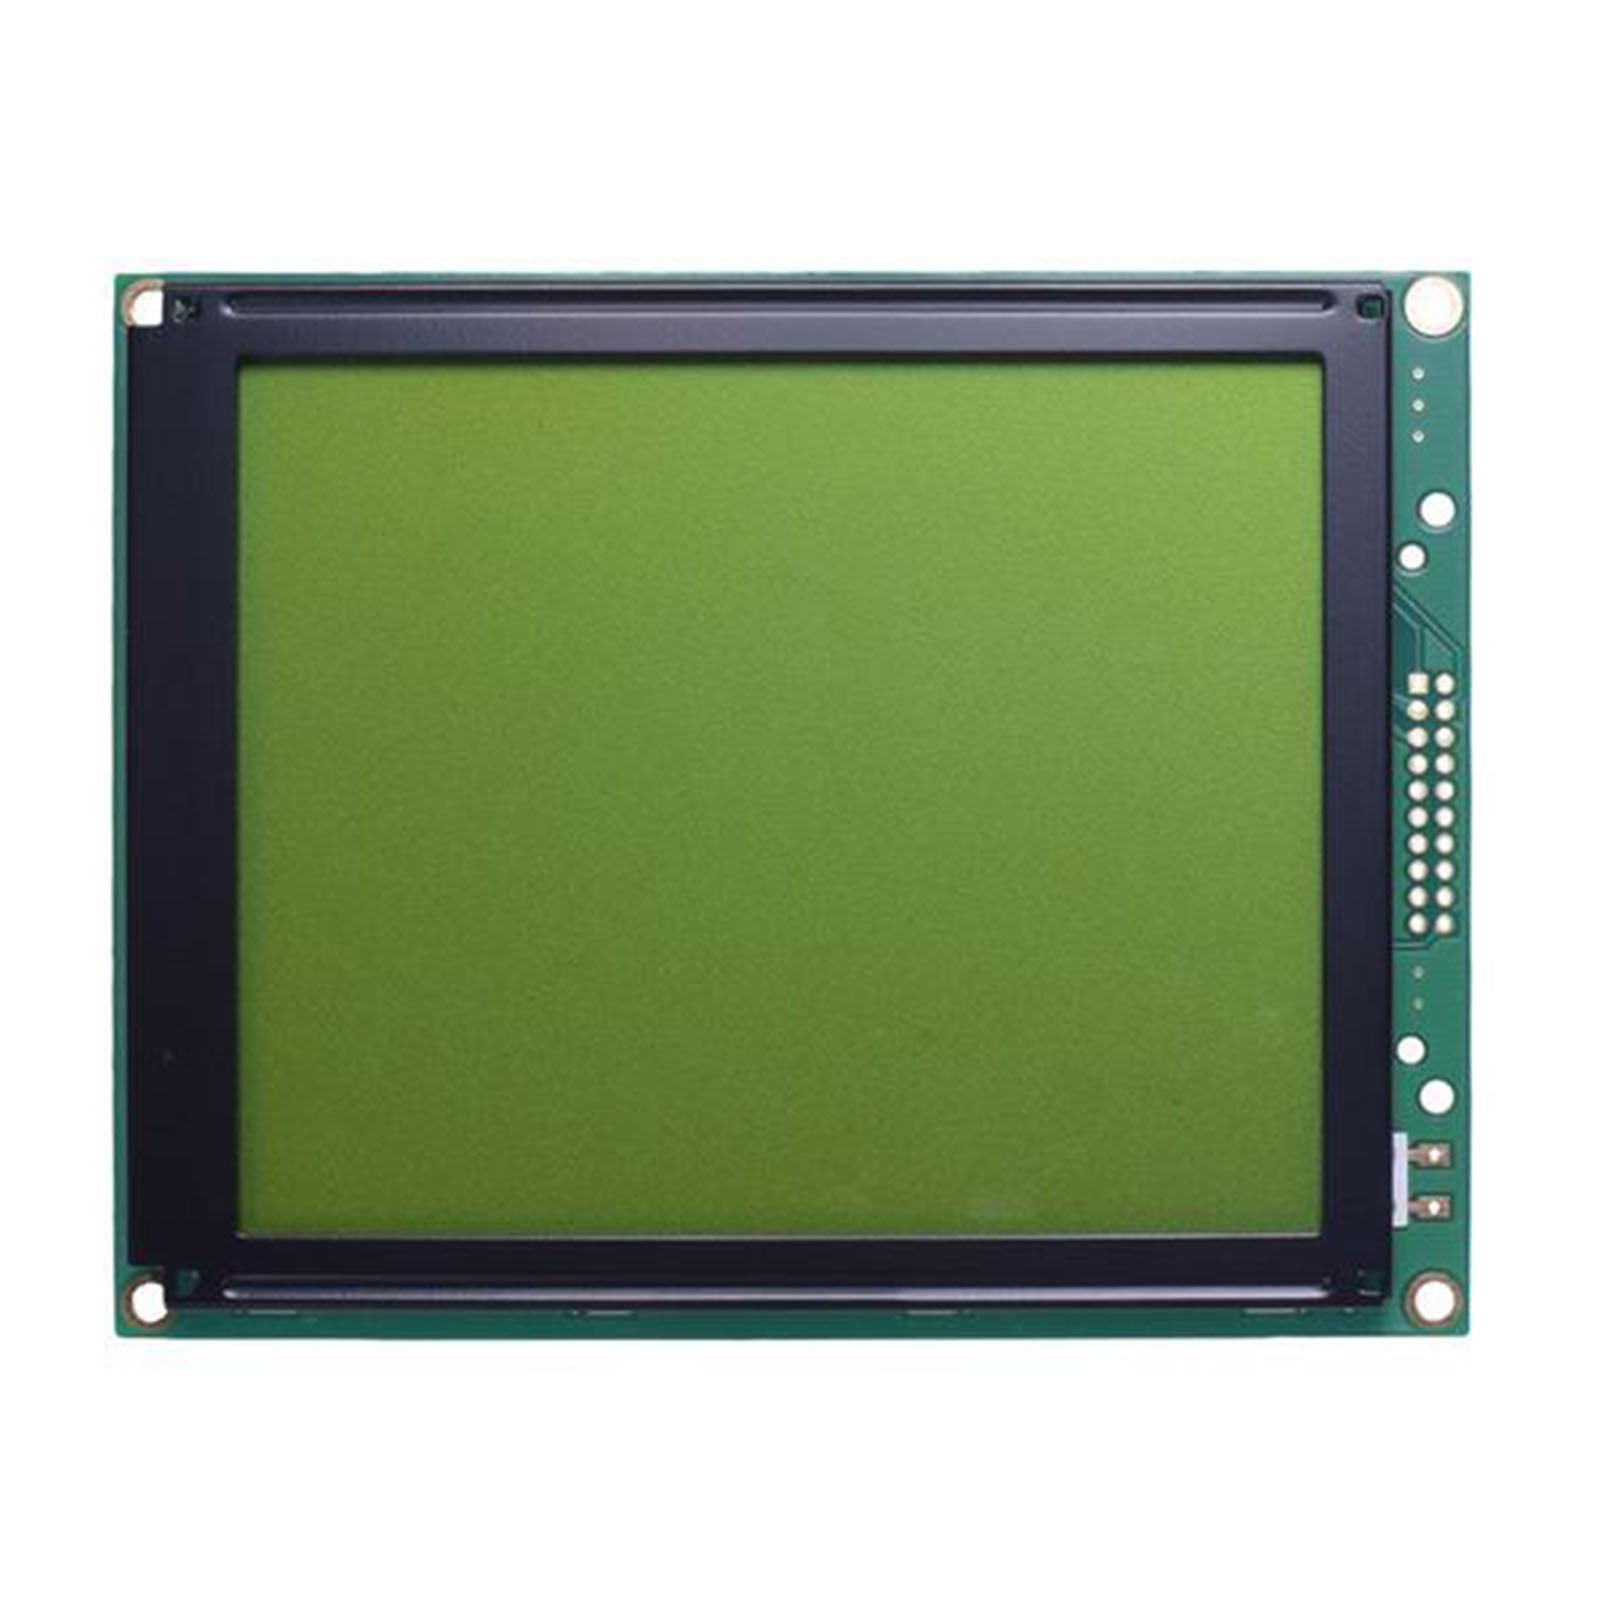 160x128 graphic LCD 5.12 inch green display module with MCU interface